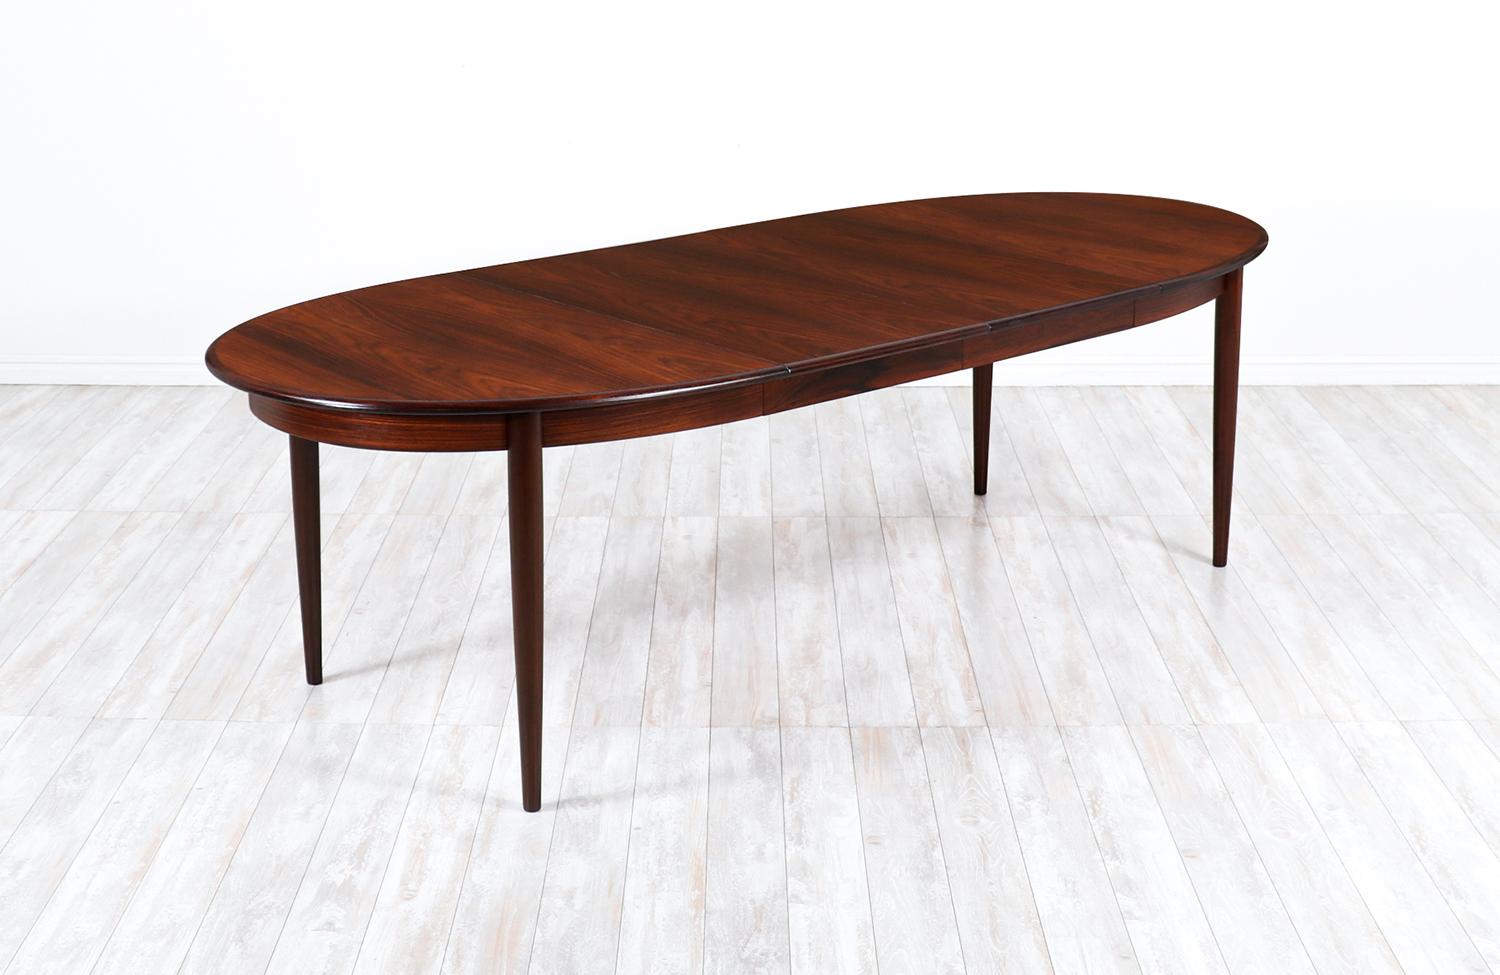 Danish modern expanding rosewood dining table by Gudme Møbelfabrik.